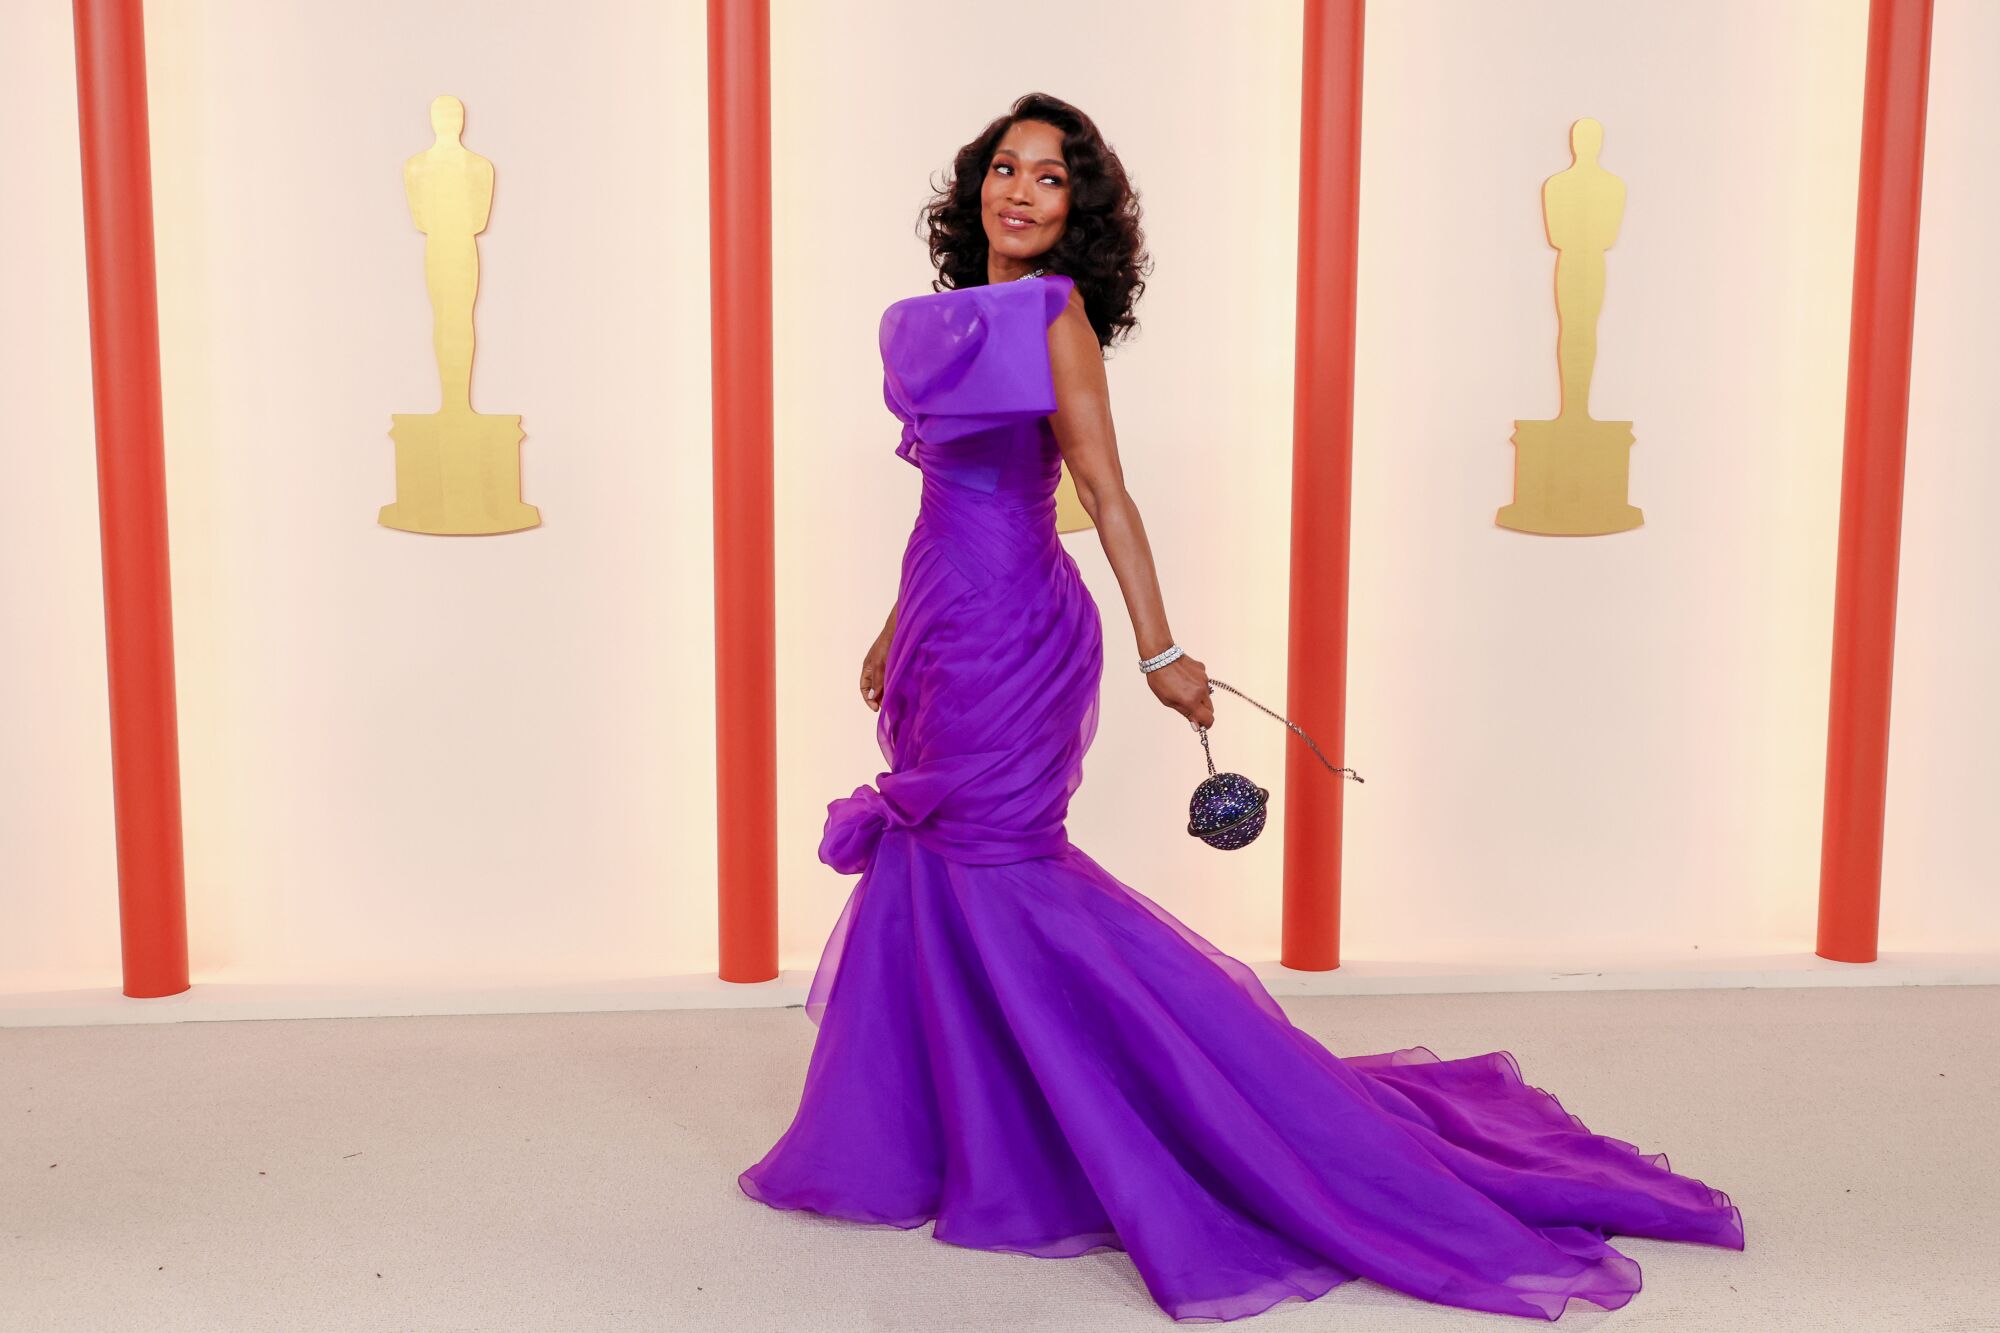 Angela Bassett on the red carpet at the 2023 Oscars.